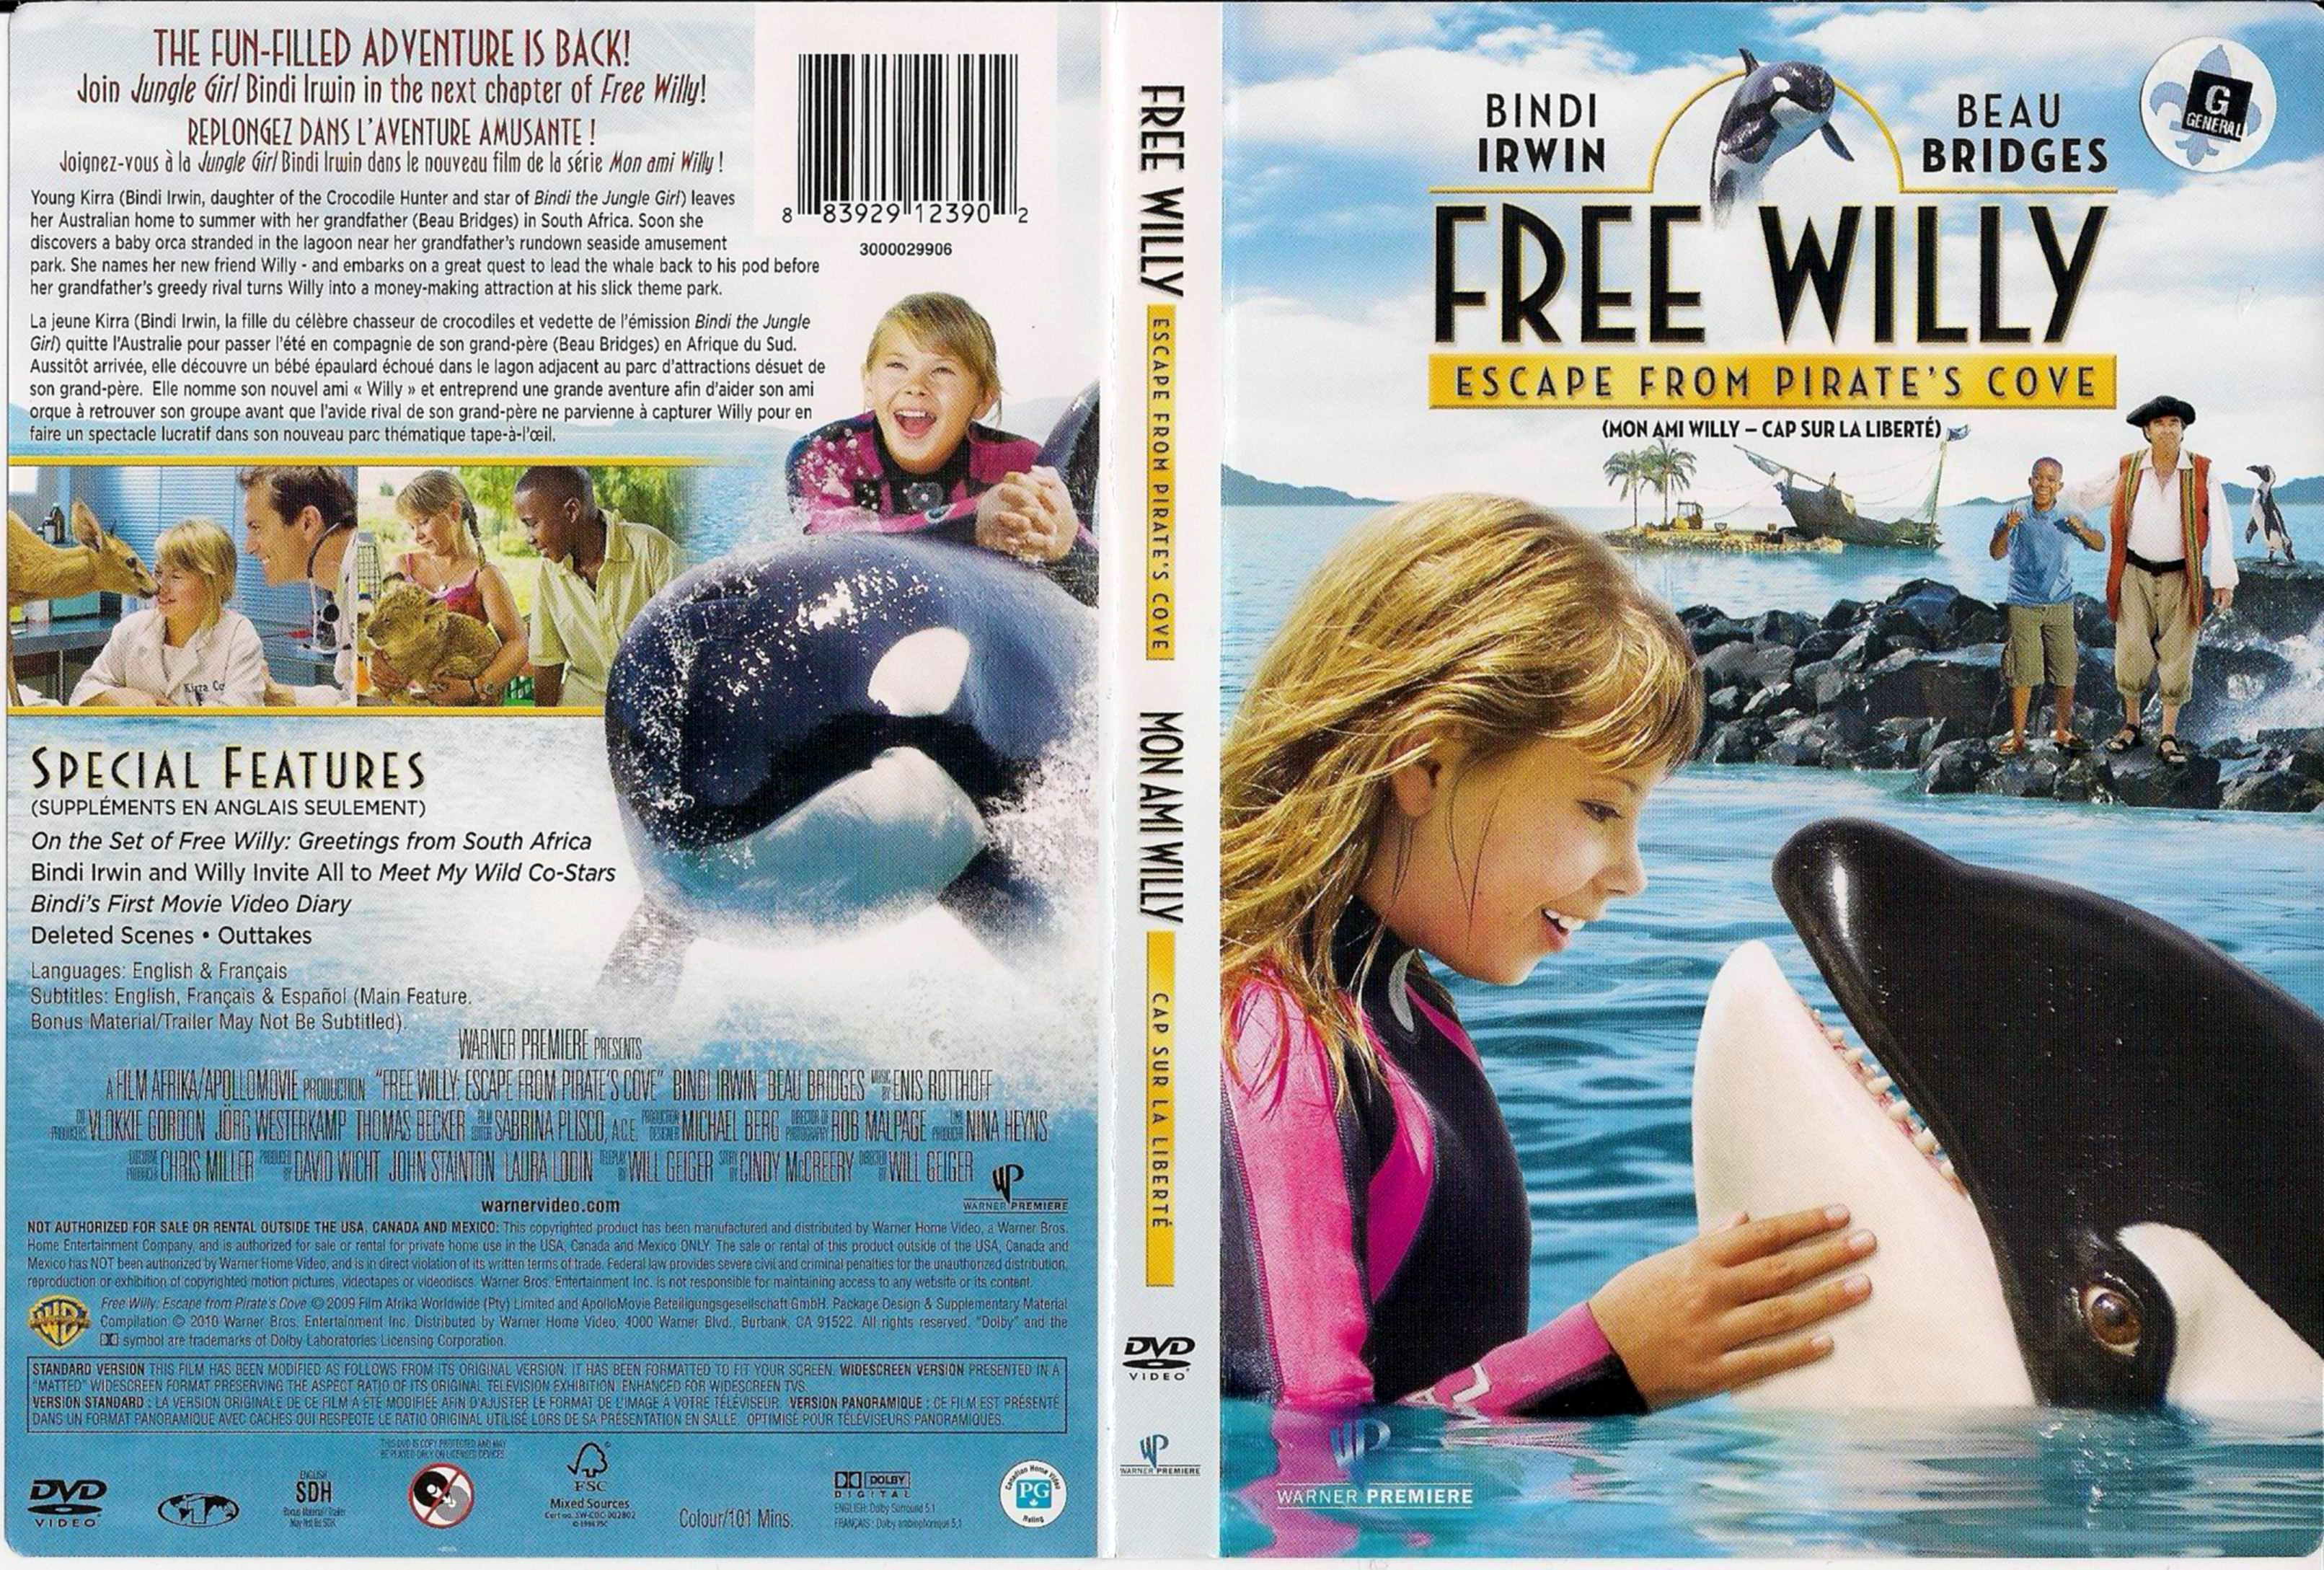 Jaquette DVD Free Willy - Mon ami Willy (Canadienne)